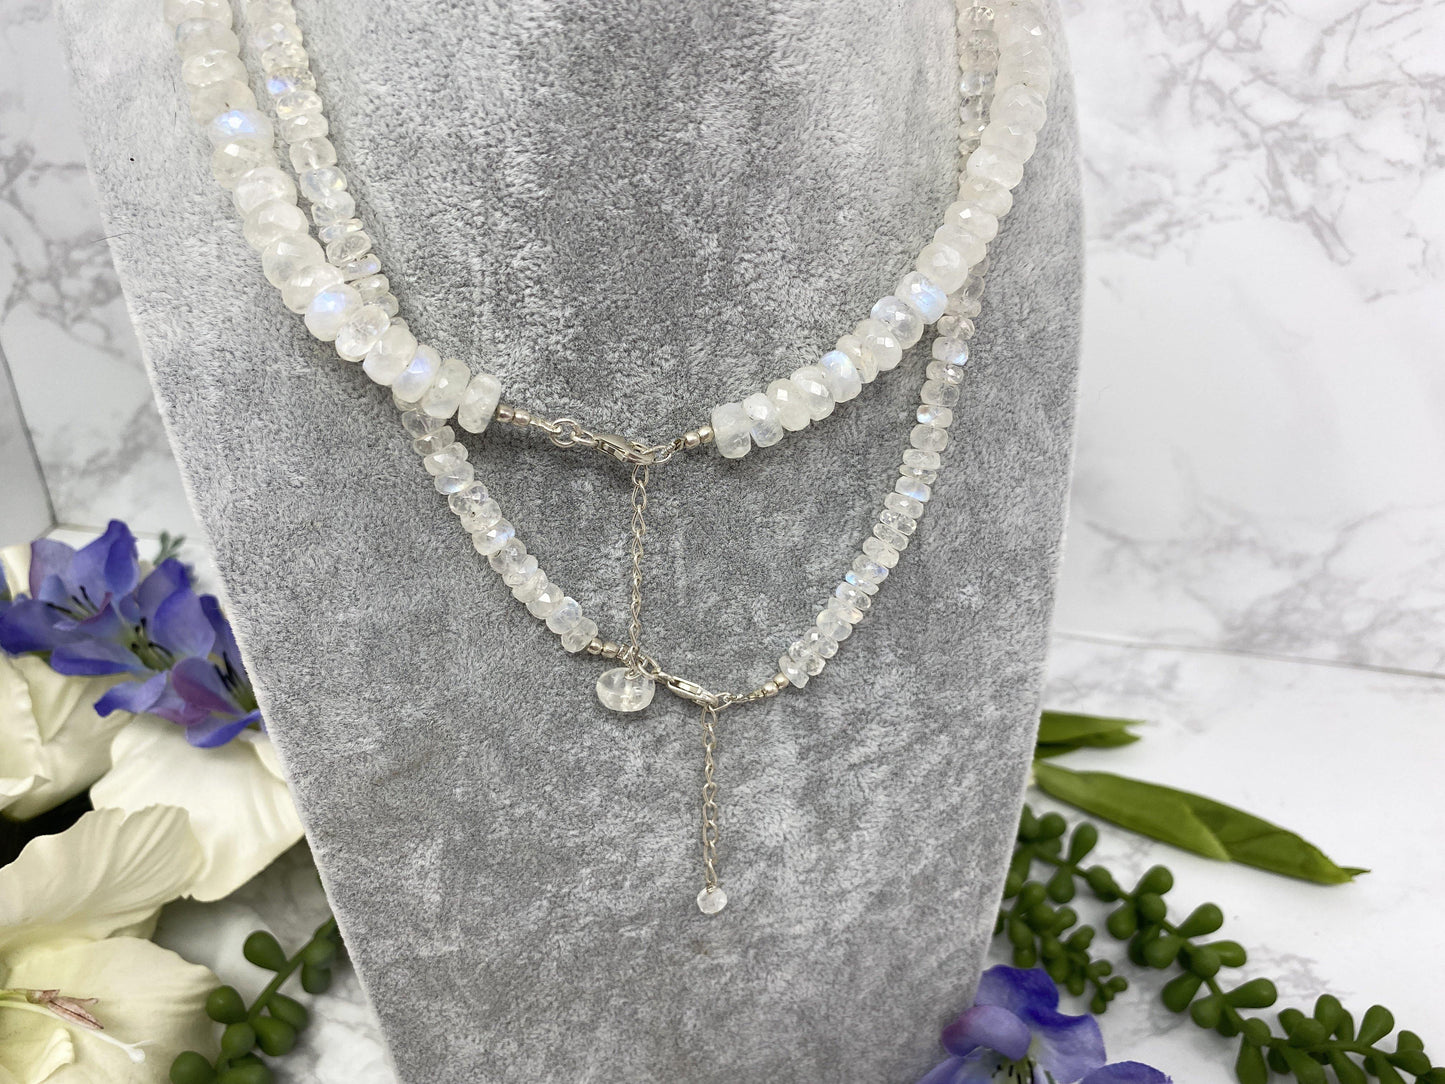 Blue flash handmade moonstone necklace from Contempo Crystals